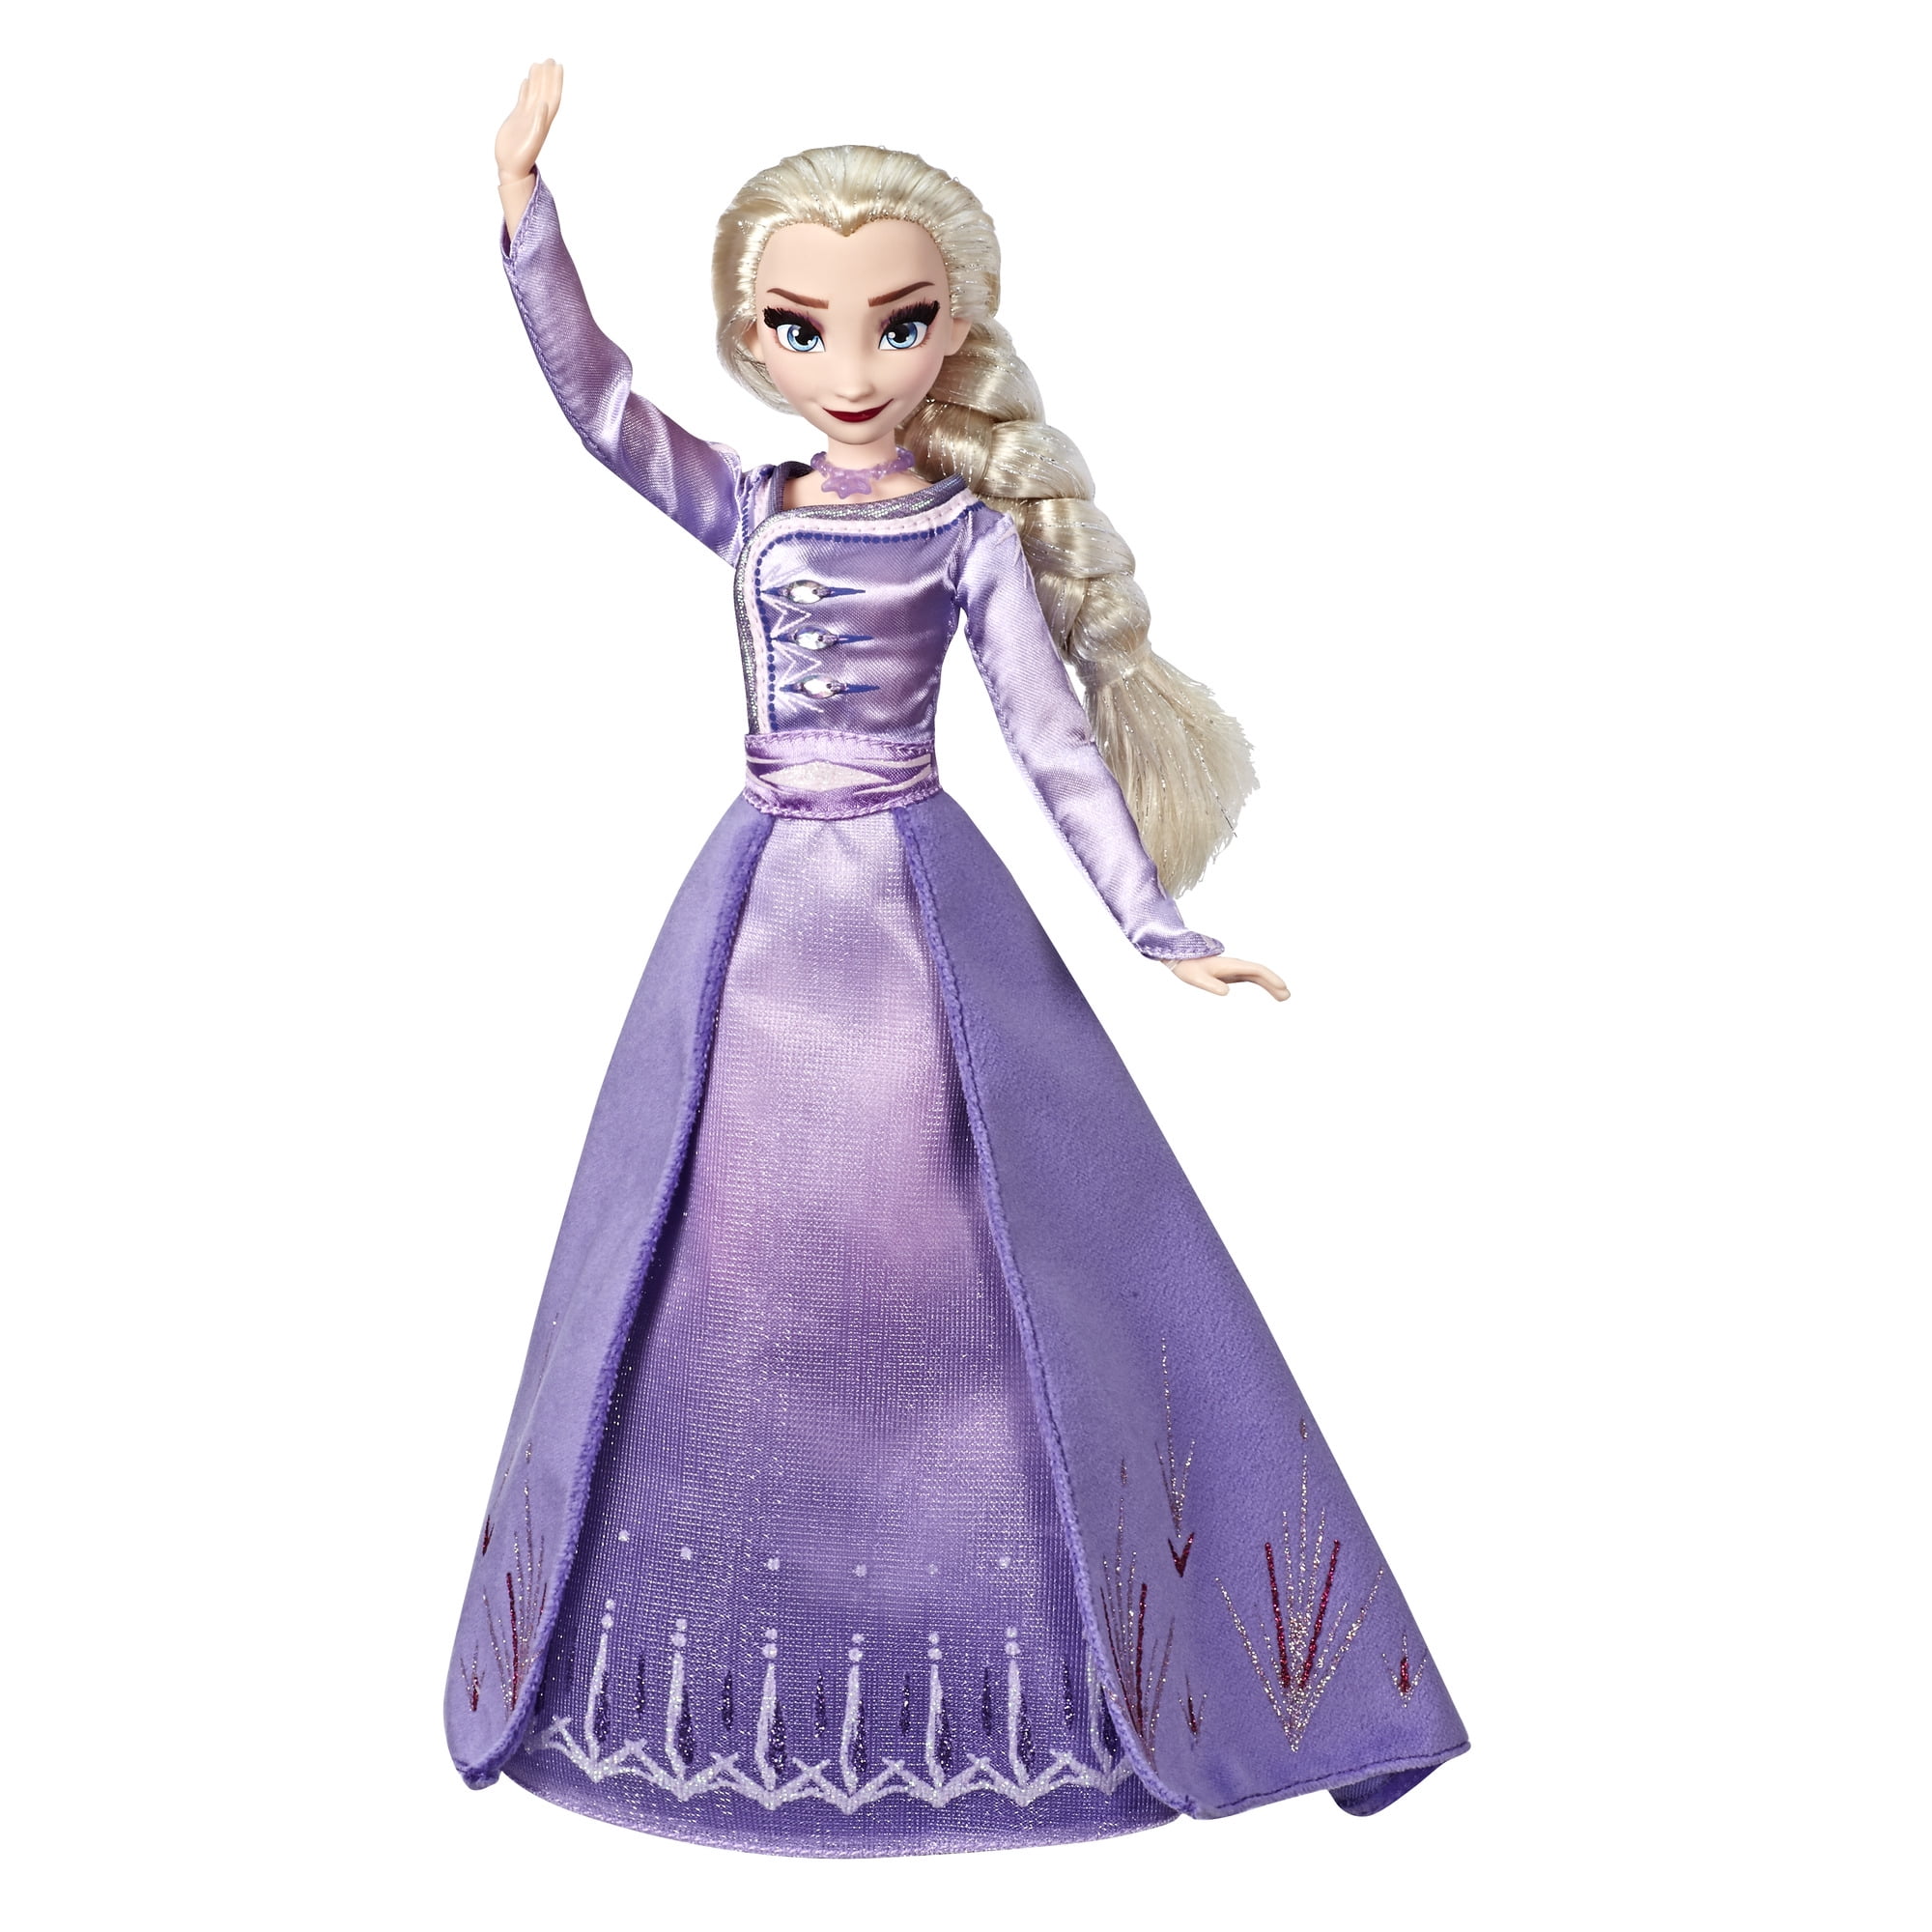 Disney Frozen Singing Elsa Fashion Doll with Music Wearing Blue Dress E6852 for sale online 